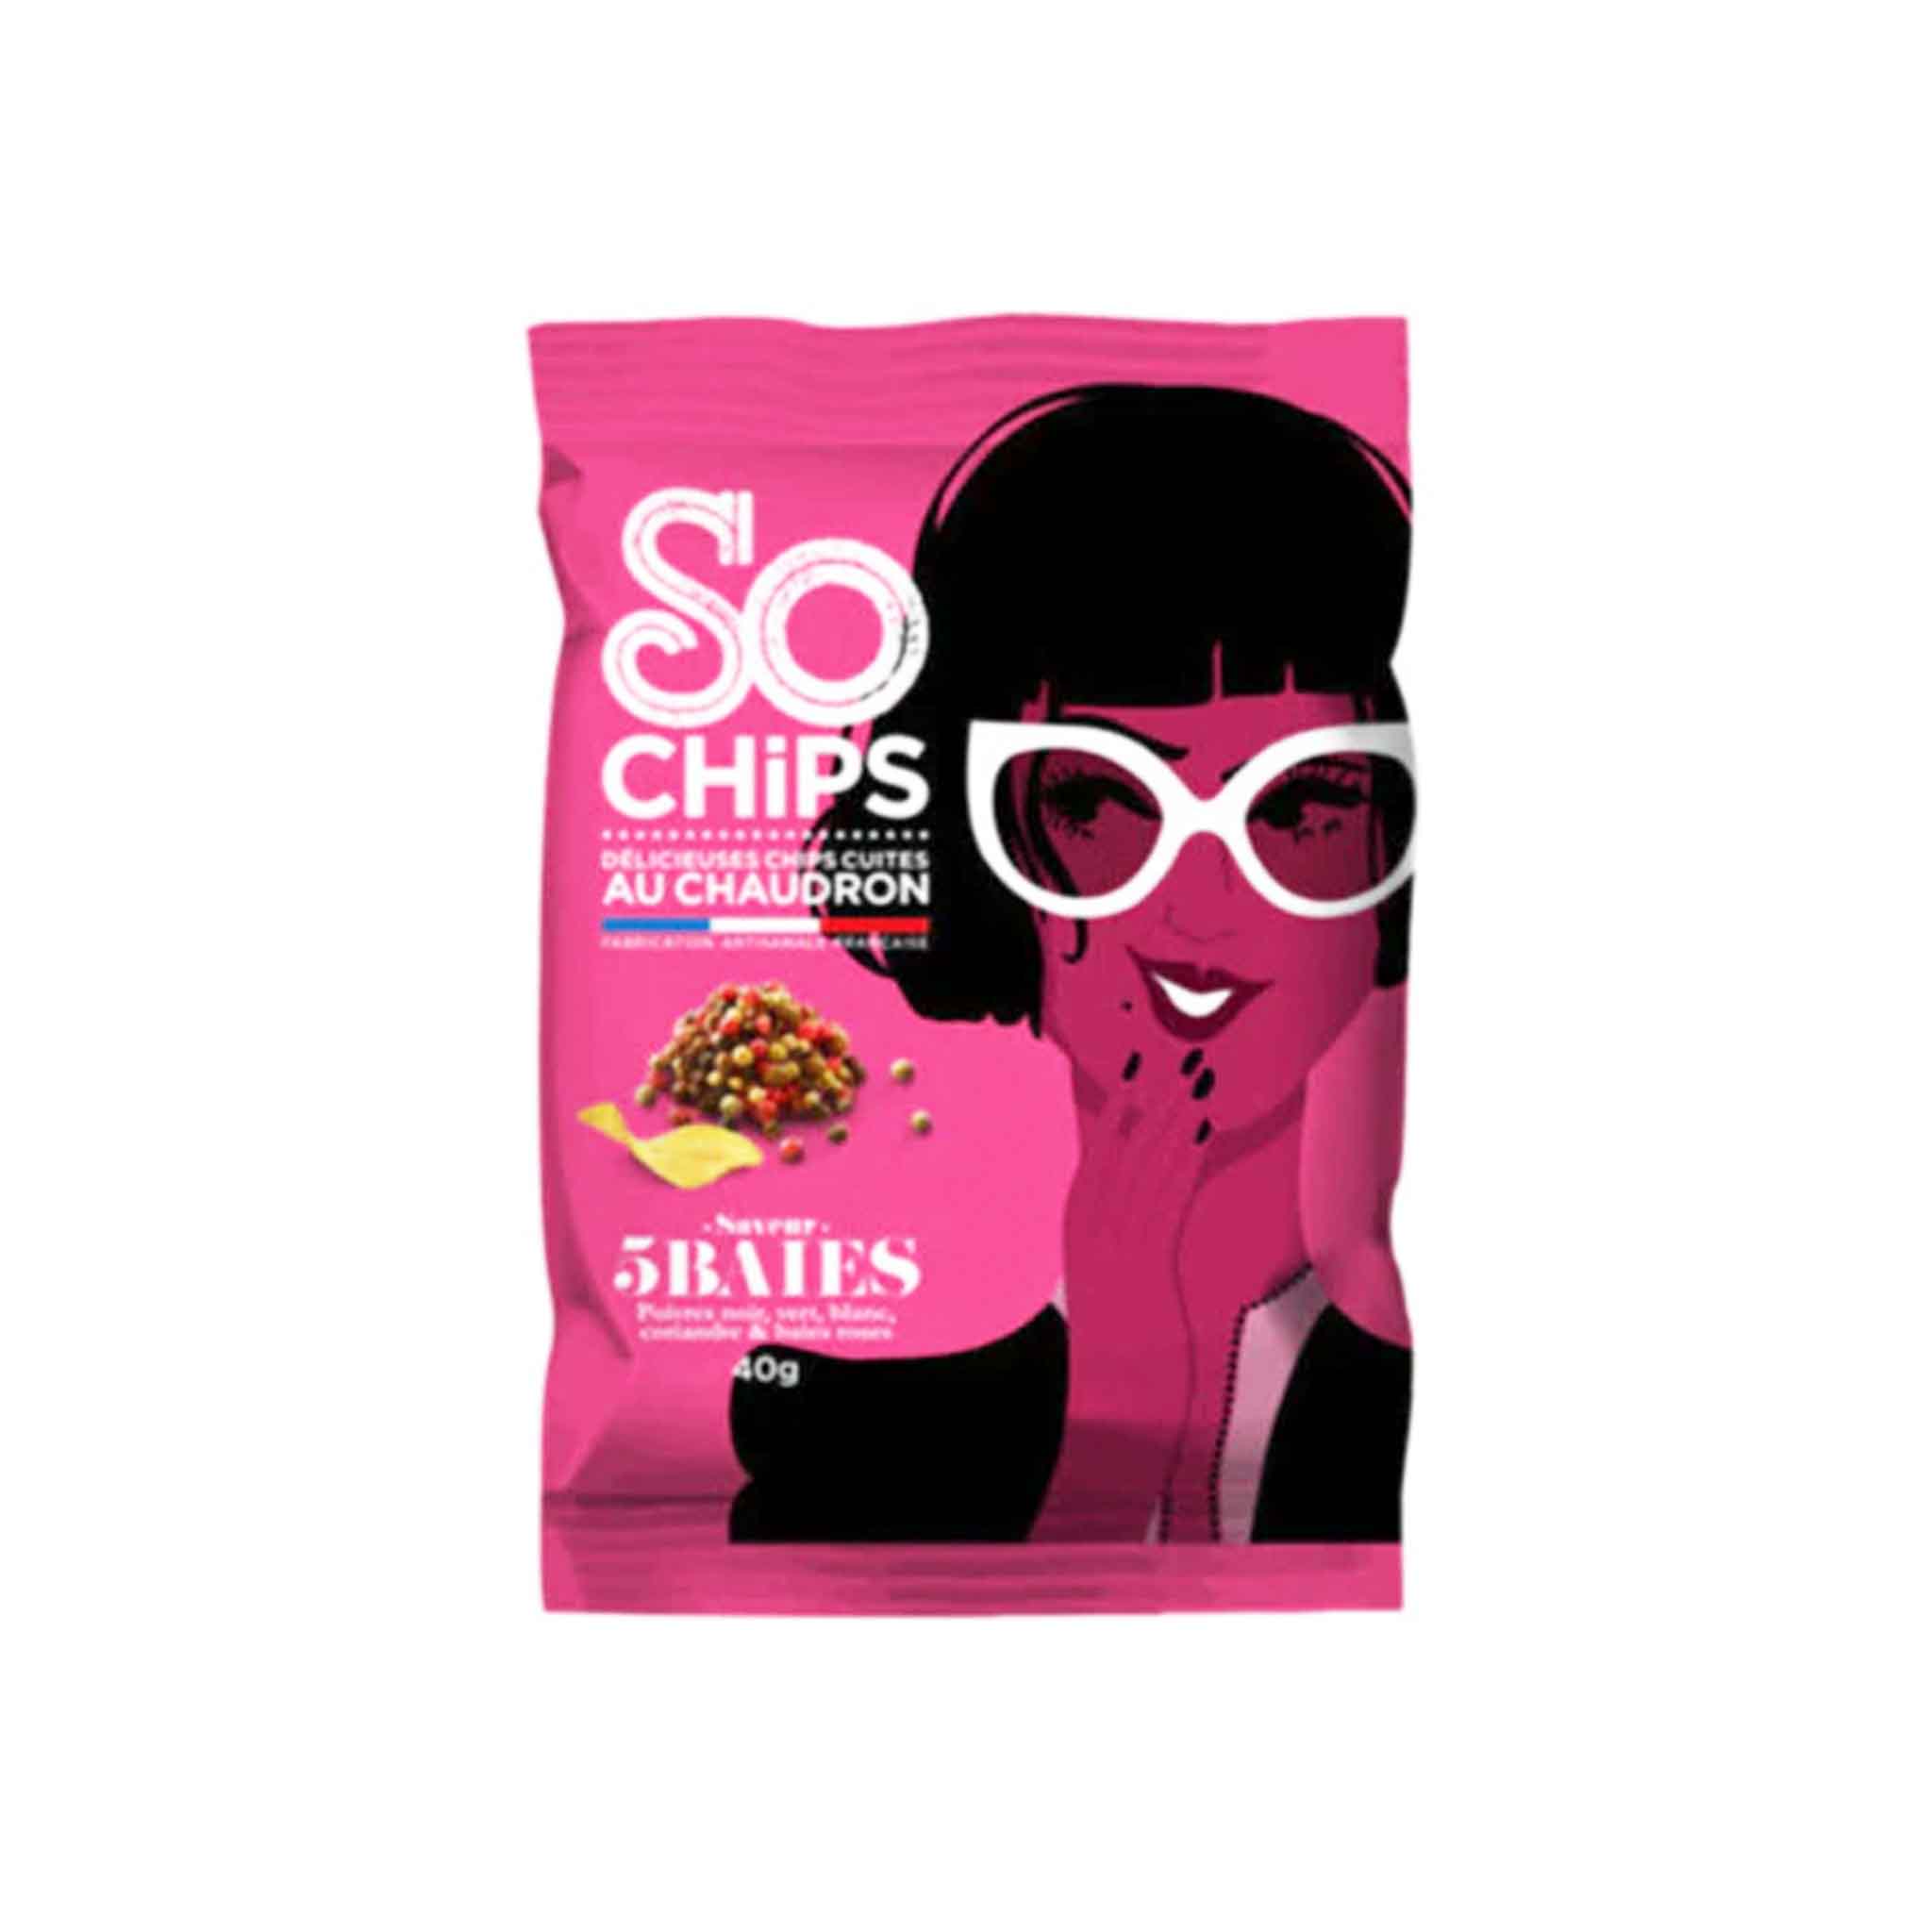 SO CHIPS 5 BAIES 40g